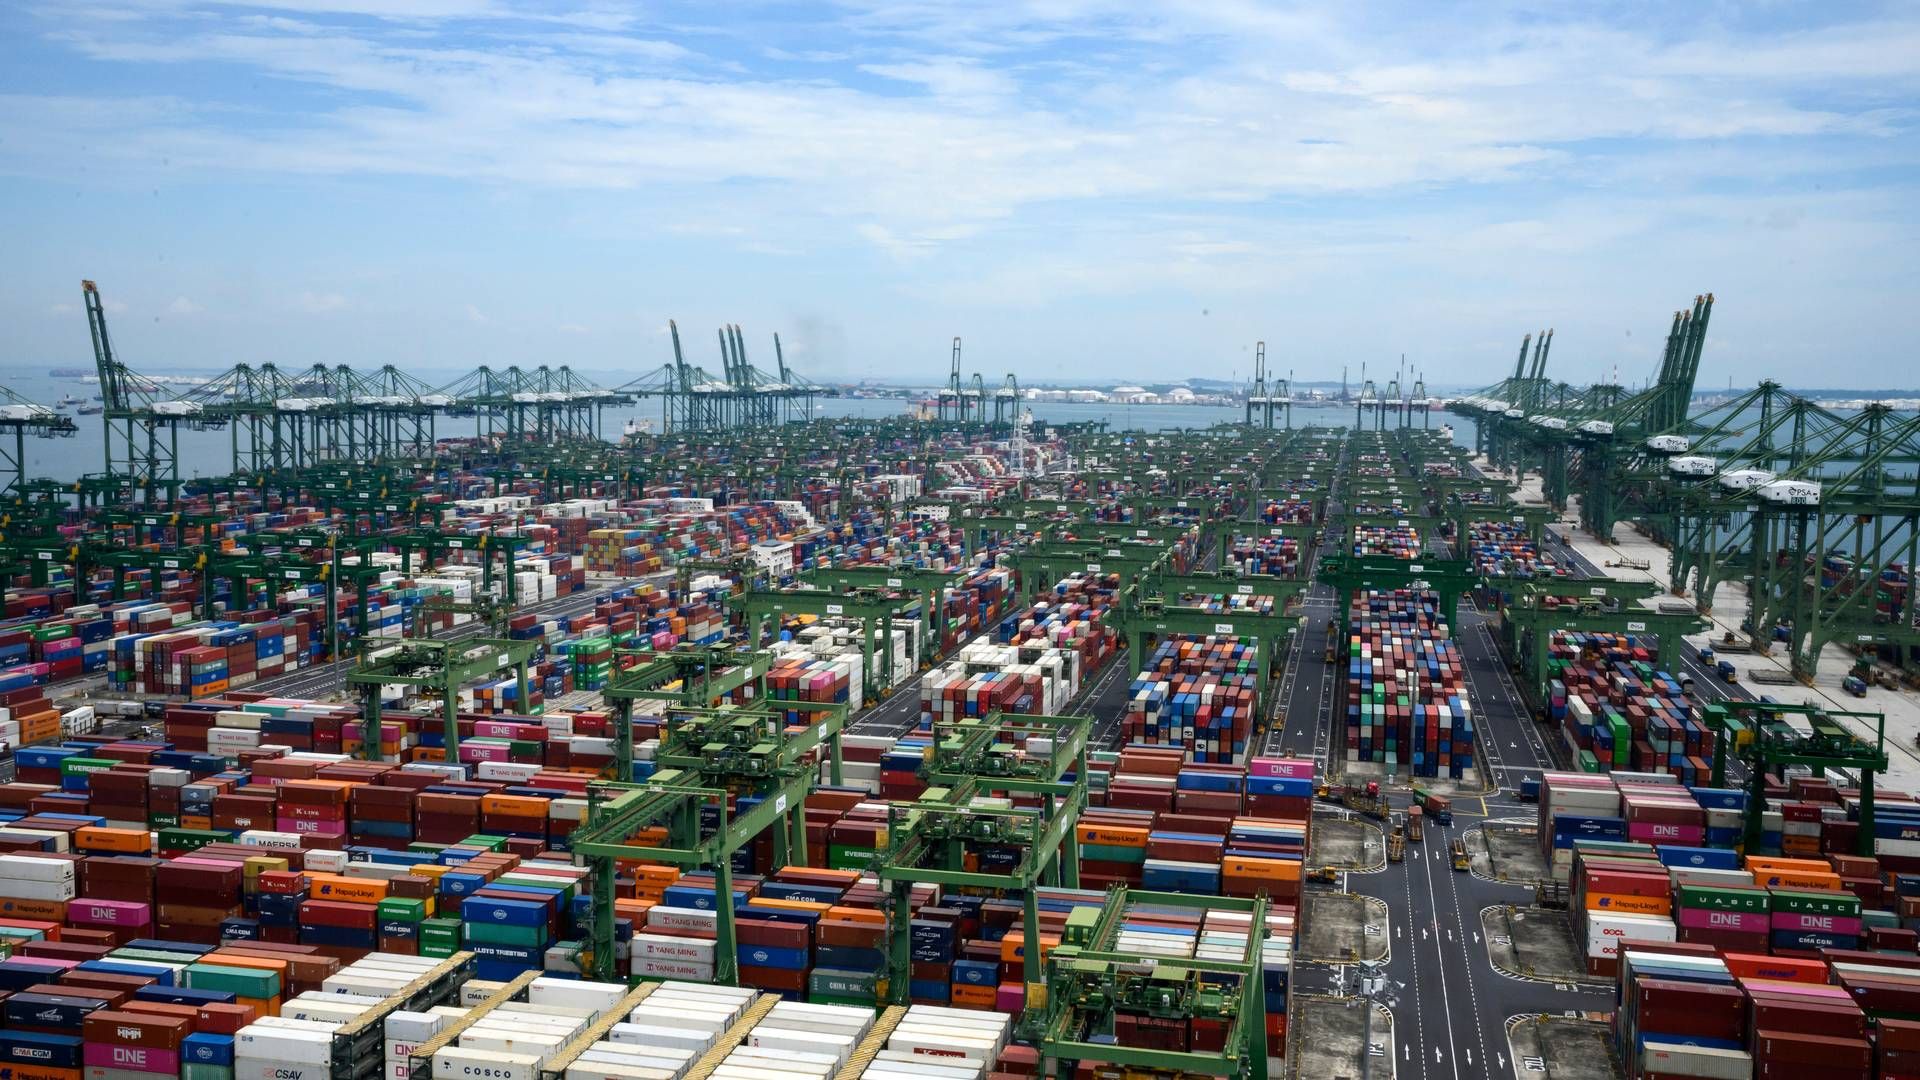 Singapore-based PSA International is one of the largest port operators in the world.